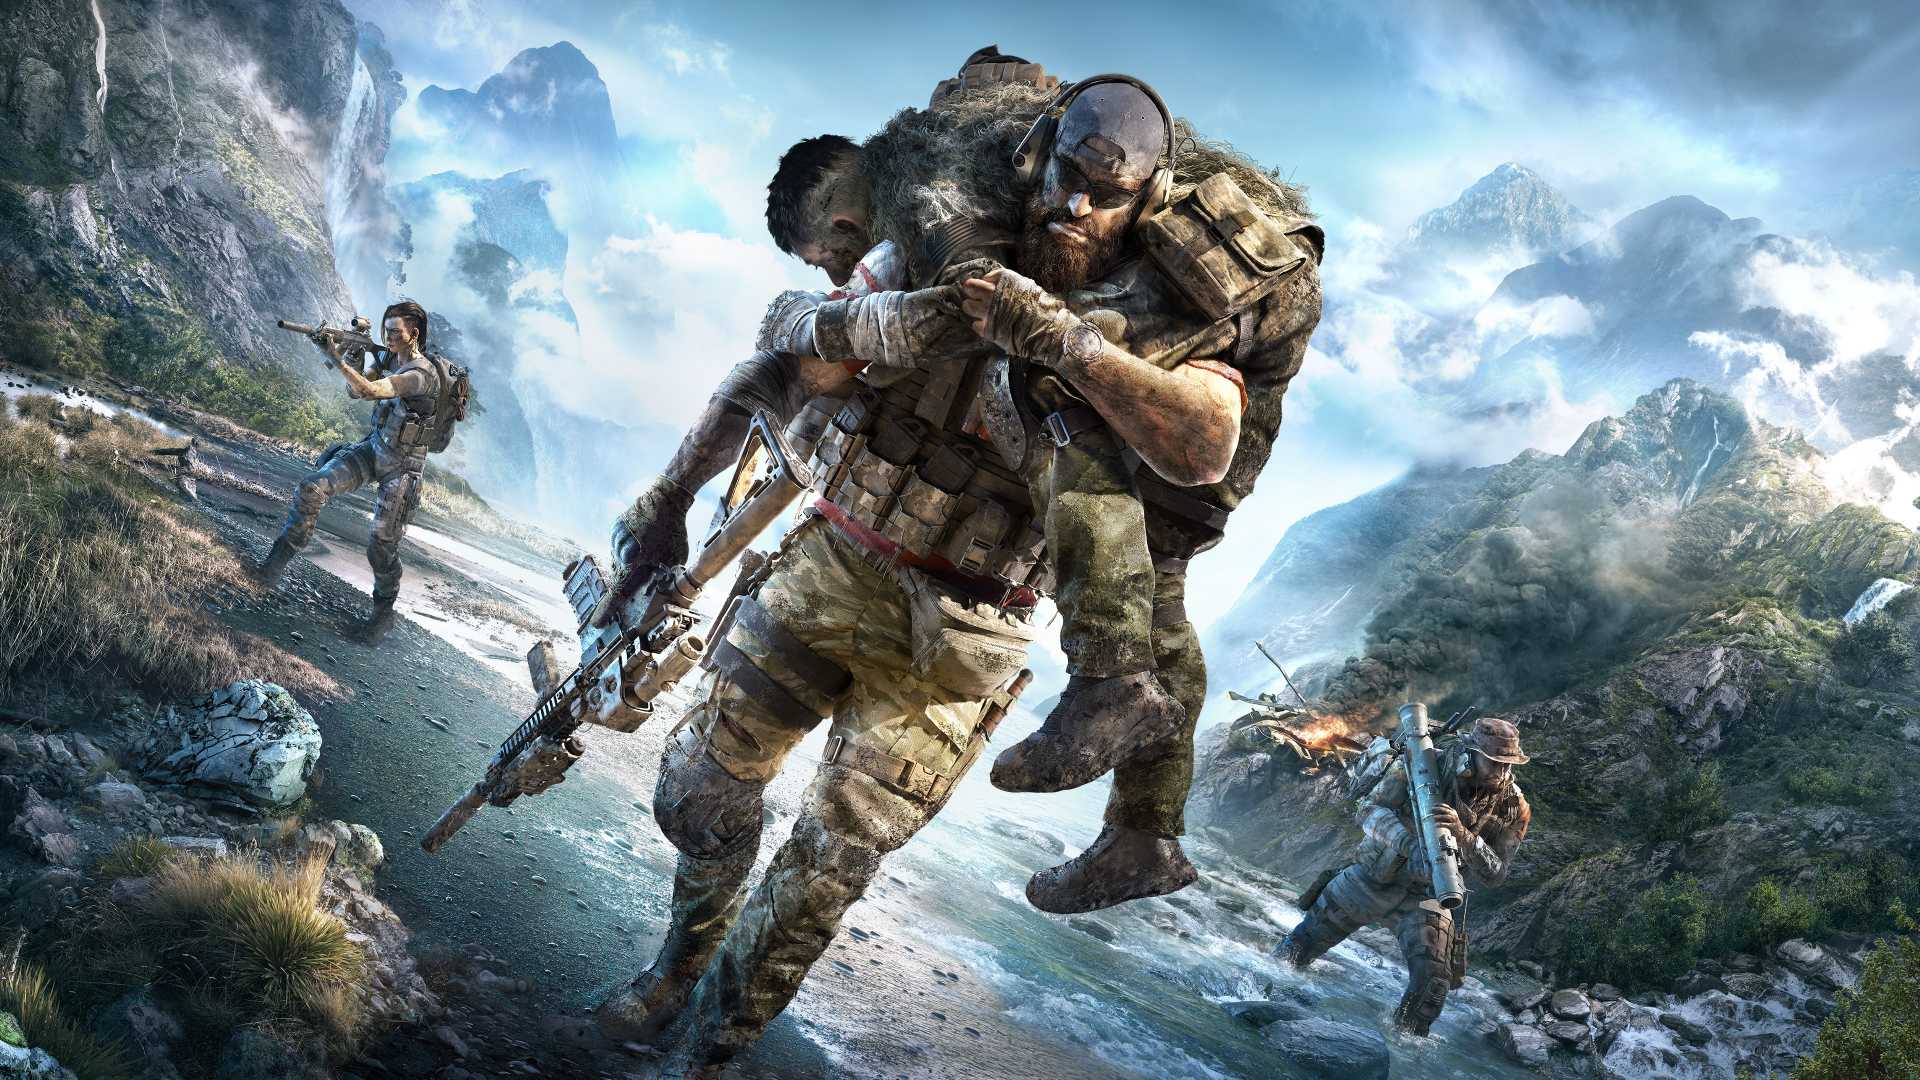 ghost recon breakpoint xbox store